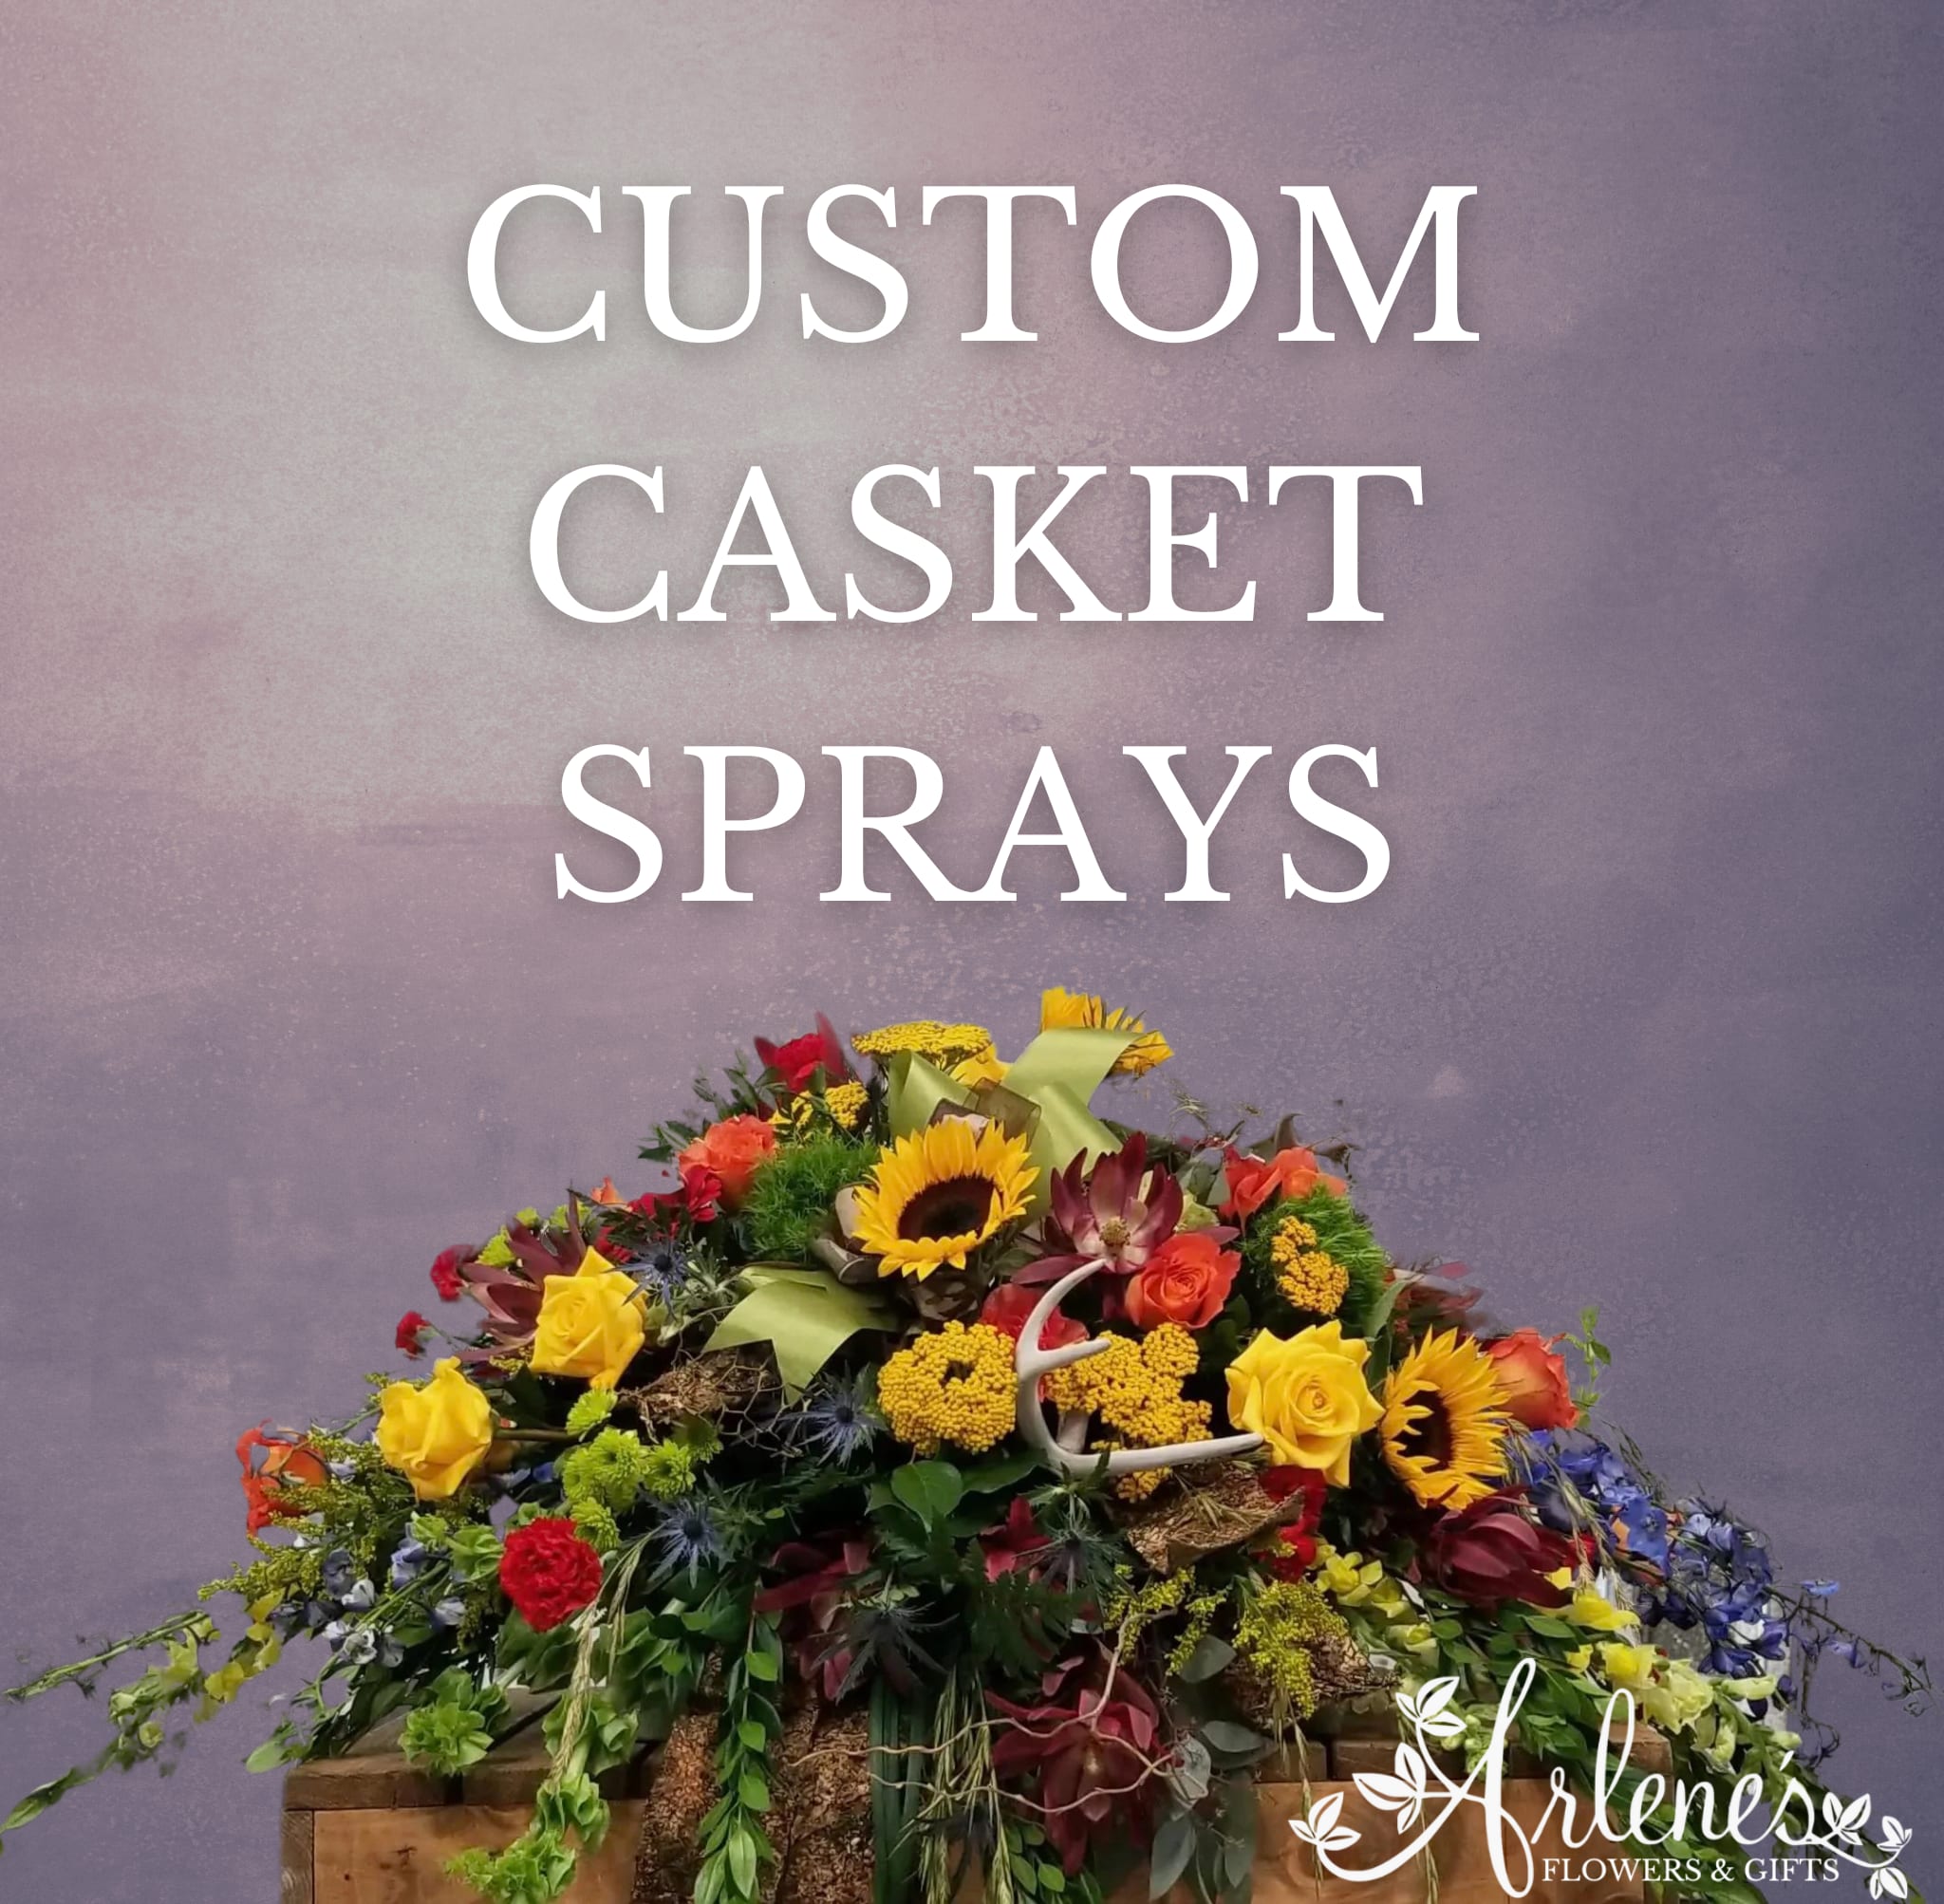 Custom Casket Spray for Men - Take a look at our gallery and then call and place your order during business hours.